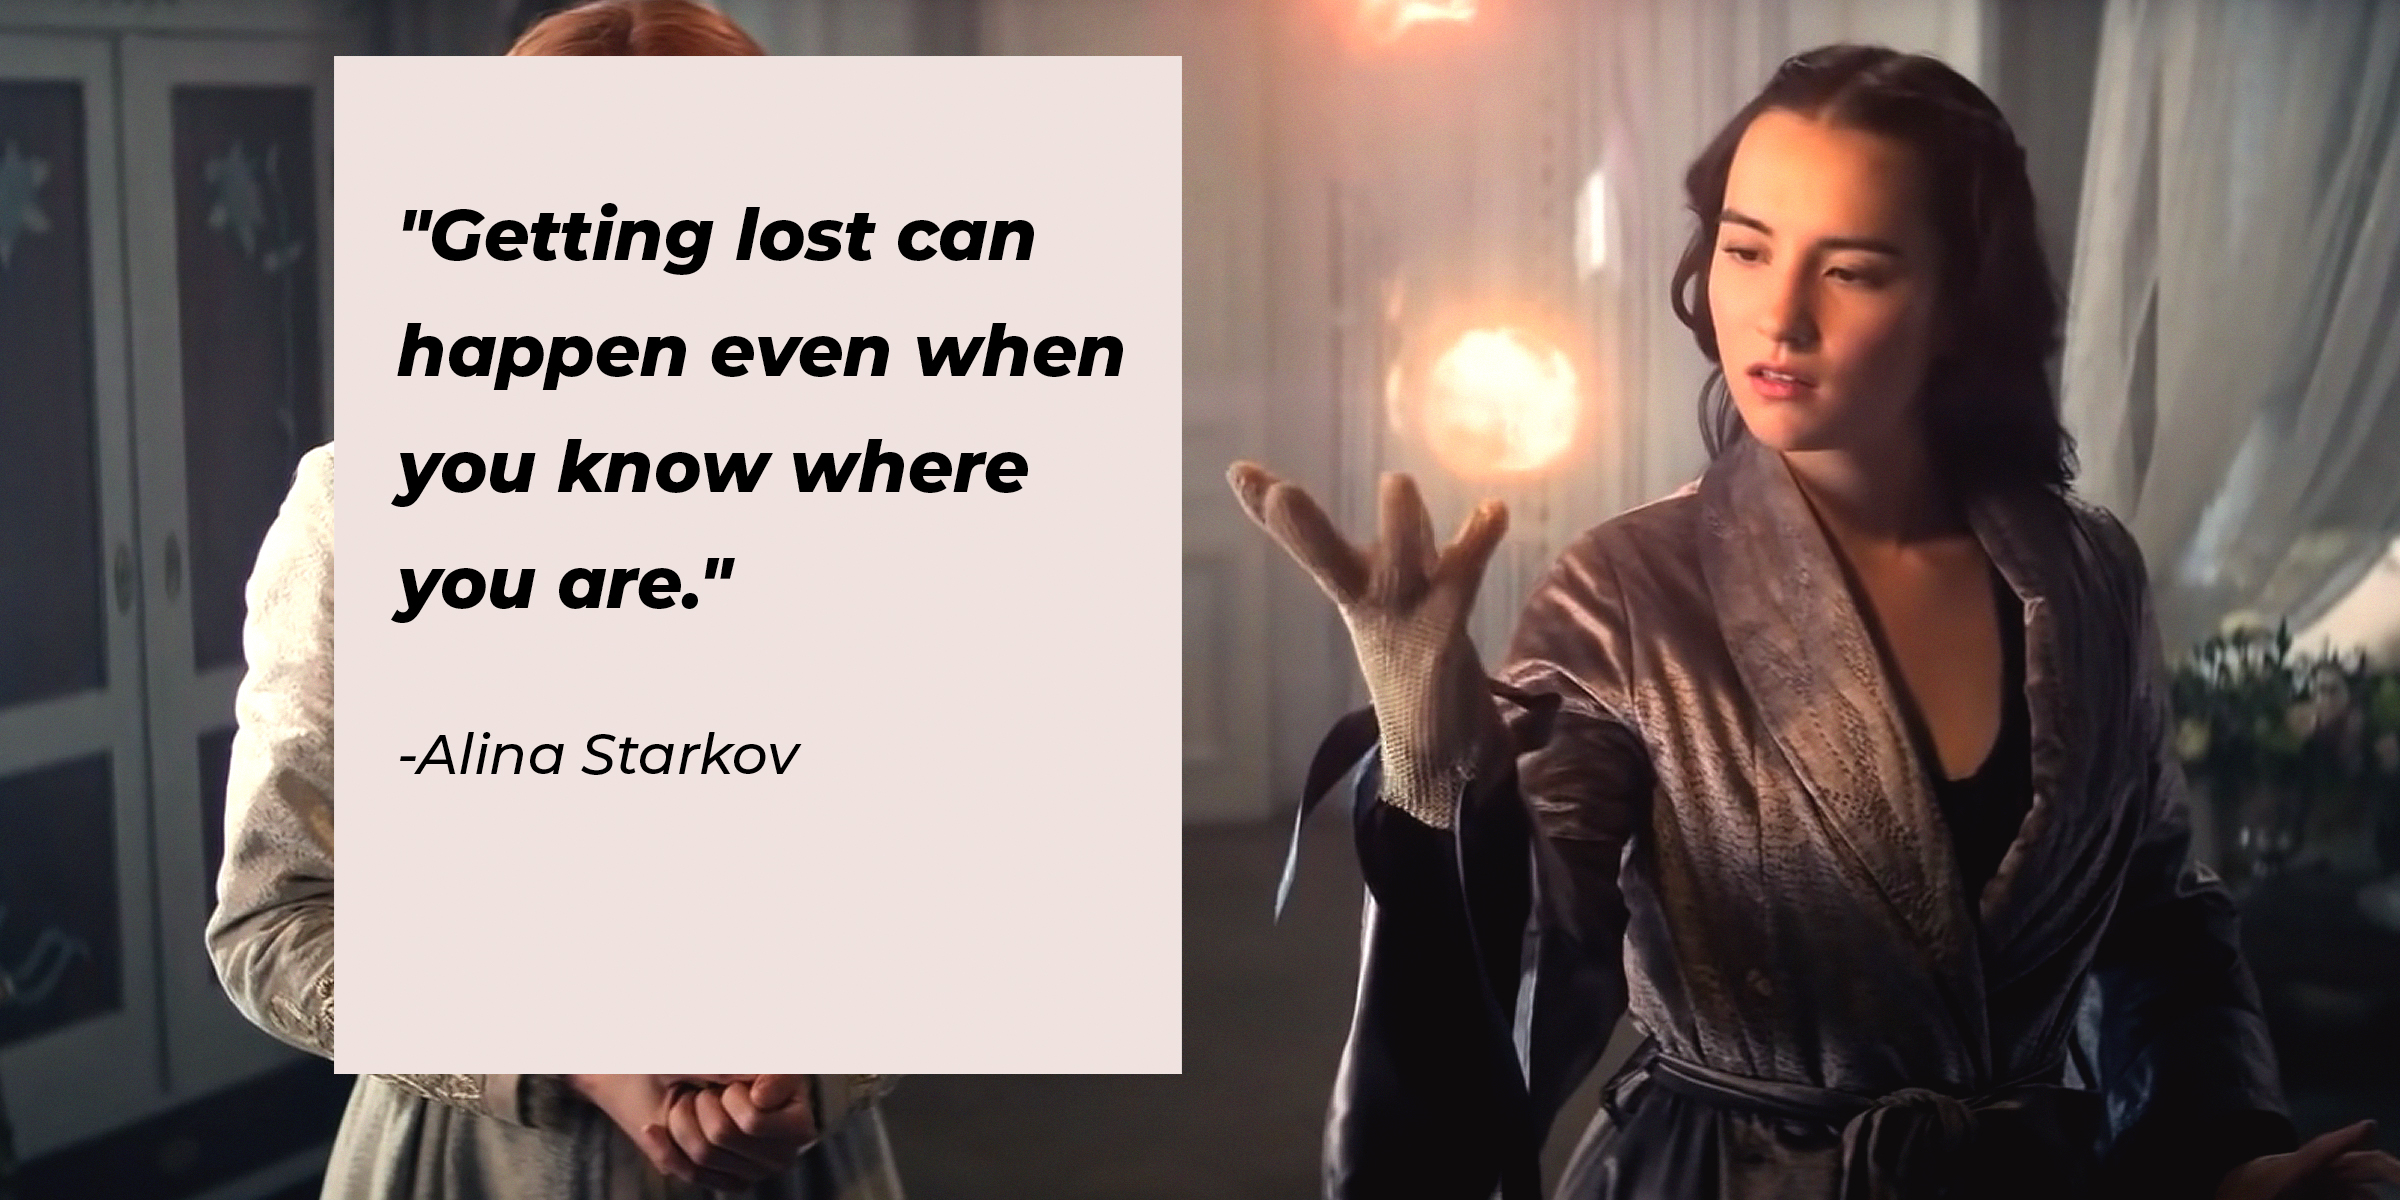 A photo of Alina Starkov with her quote, "Getting lost can happen even when you know where you are." | Source: Youtube.com/Netflix